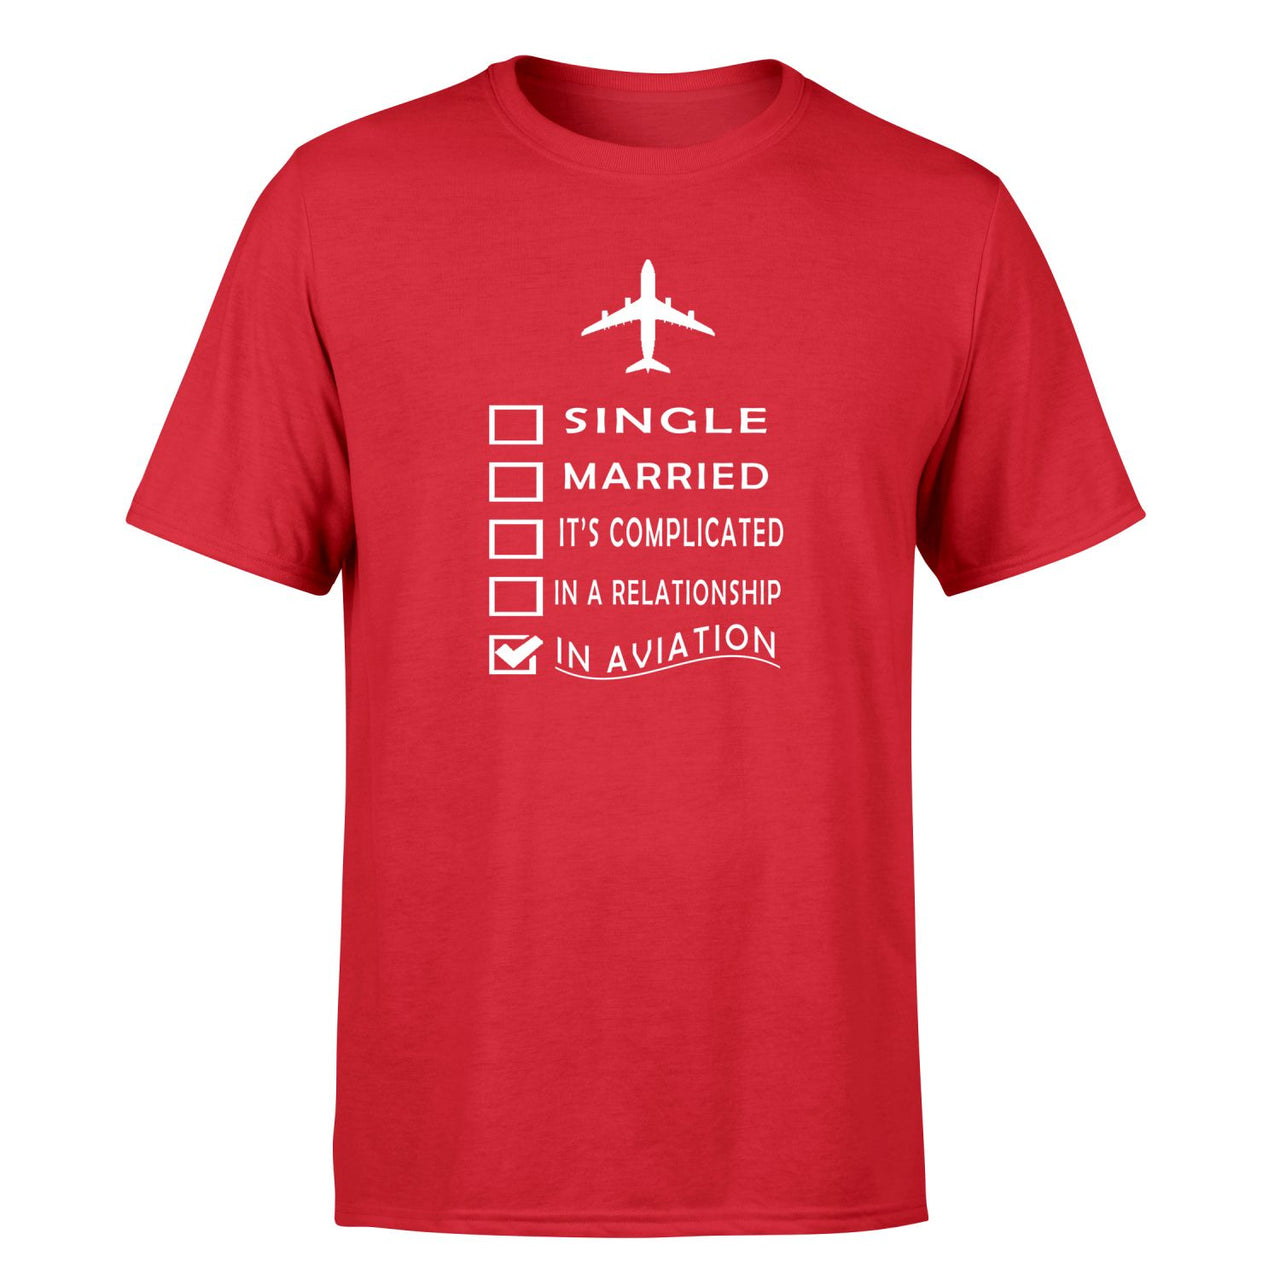 In Aviation Designed T-Shirts